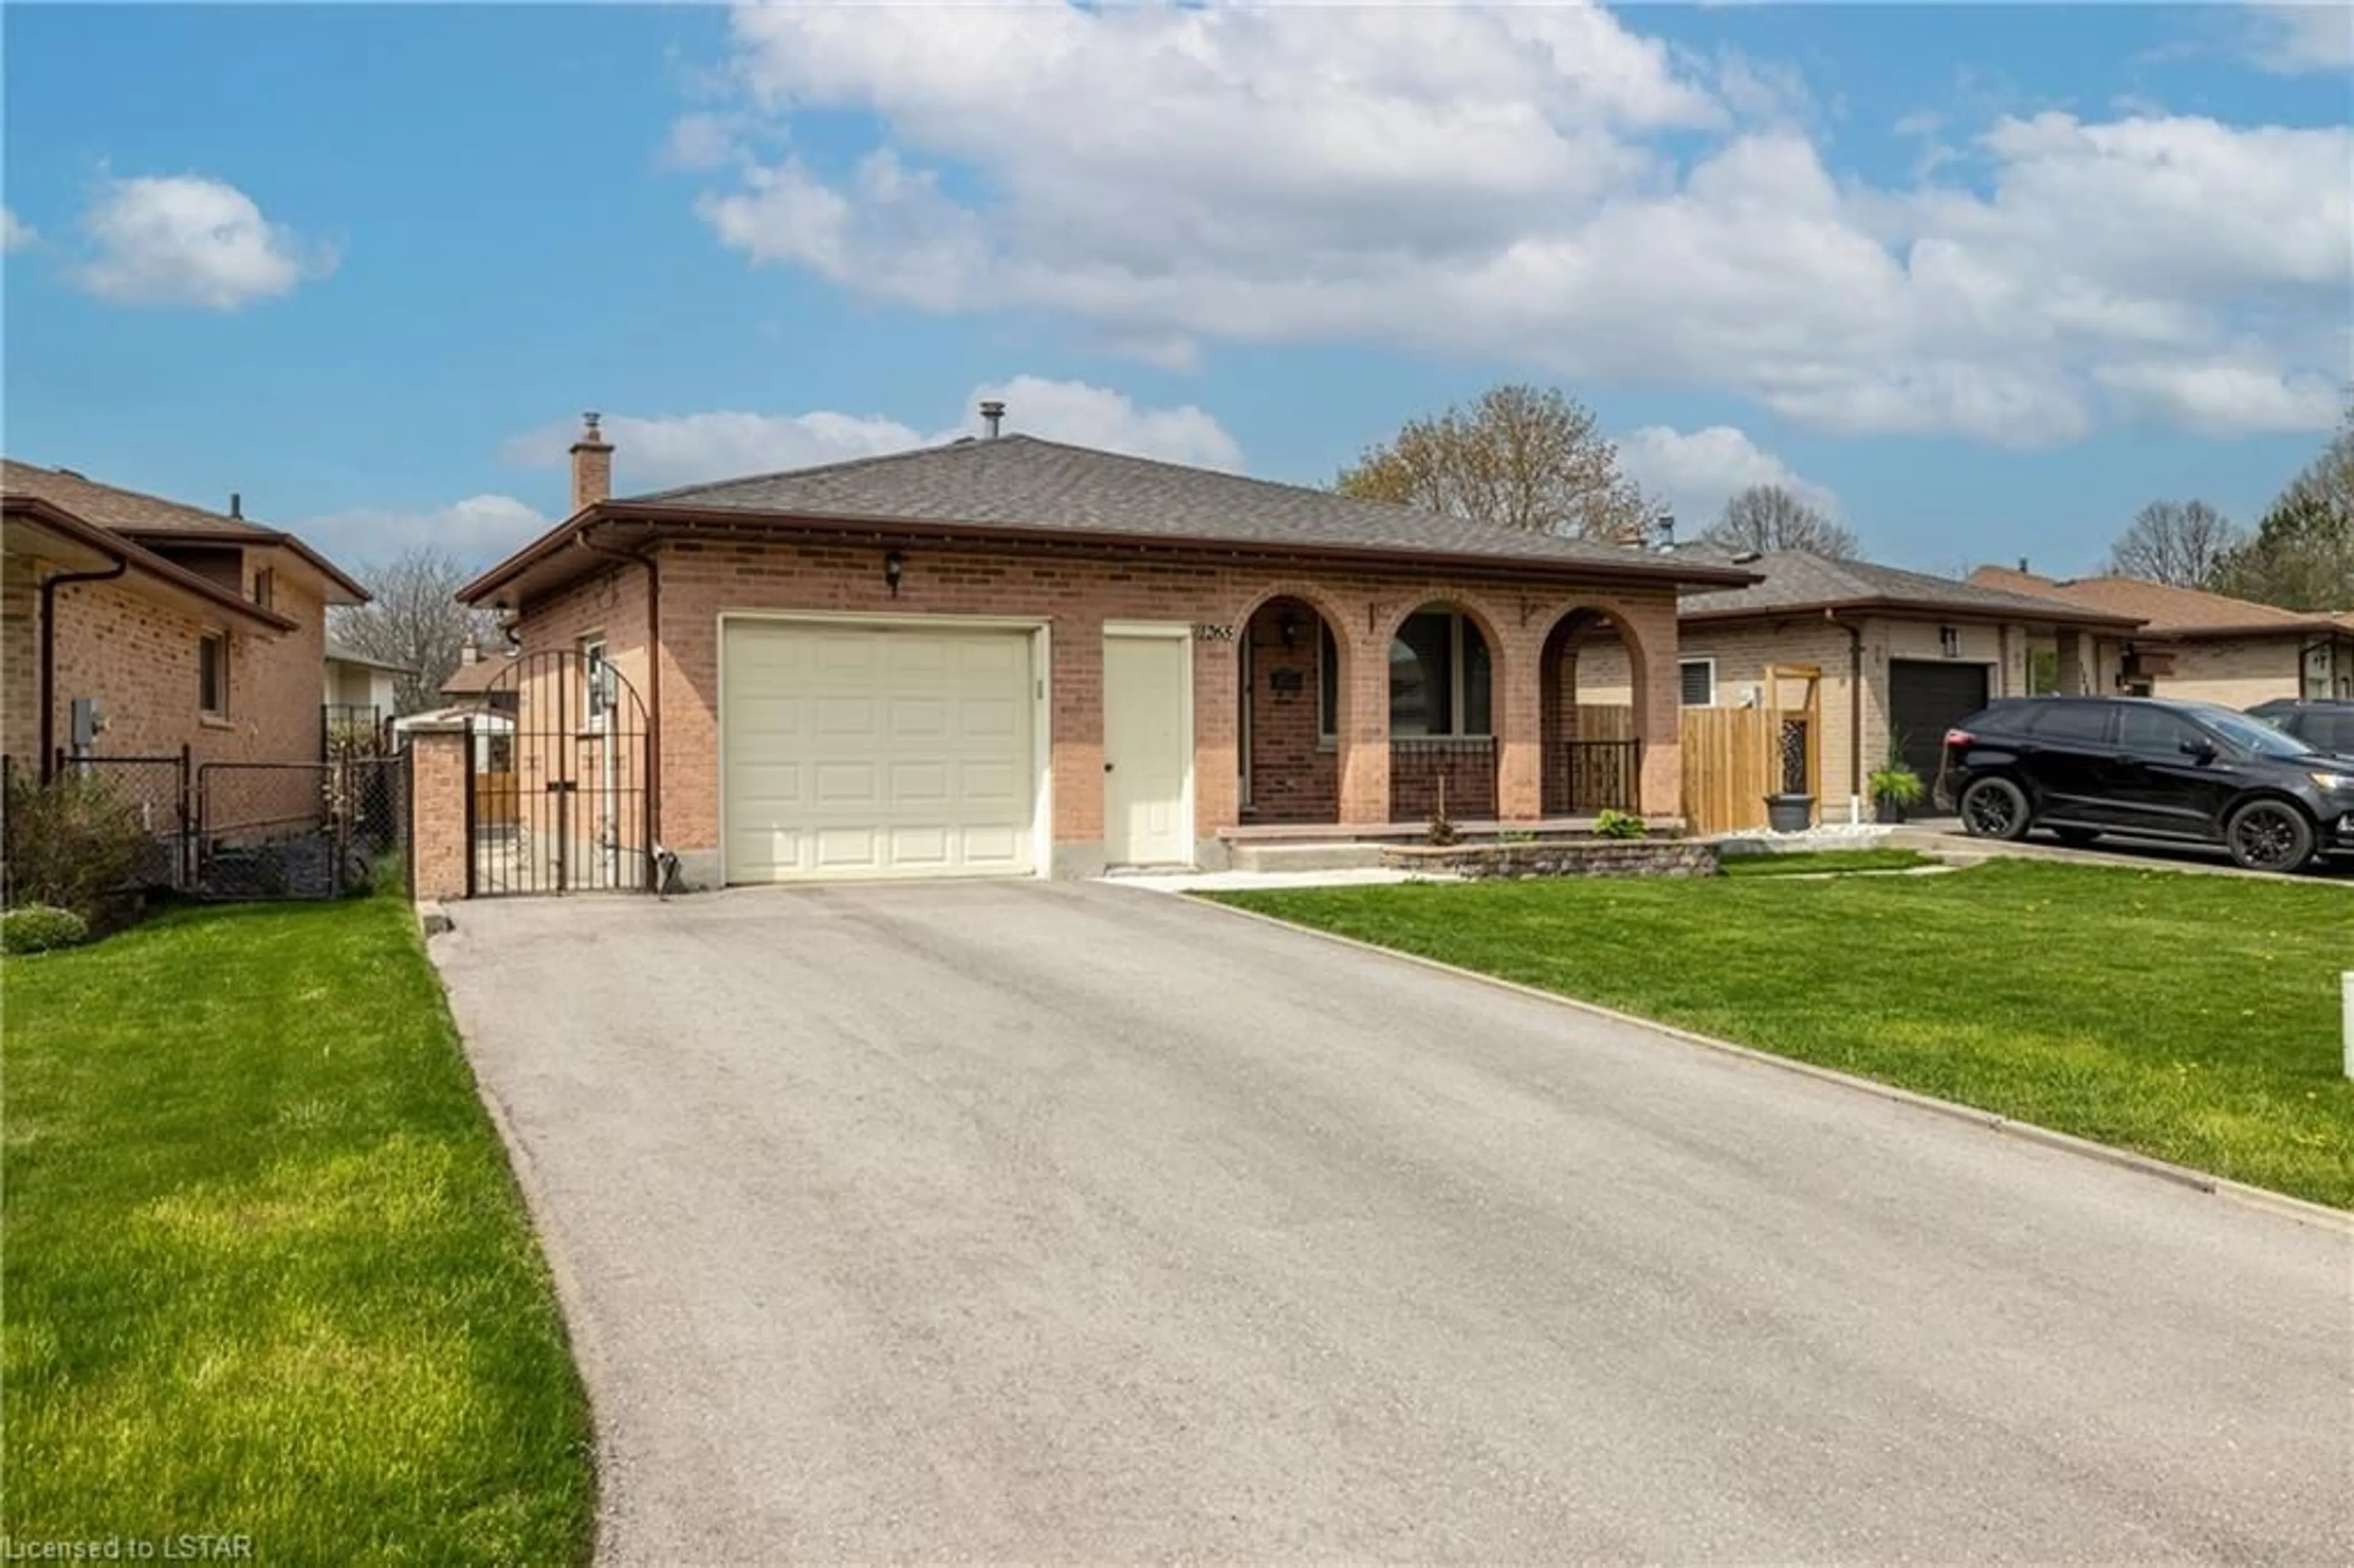 Frontside or backside of a home for 1265 Delphi Rd, London Ontario N5Y 5B3